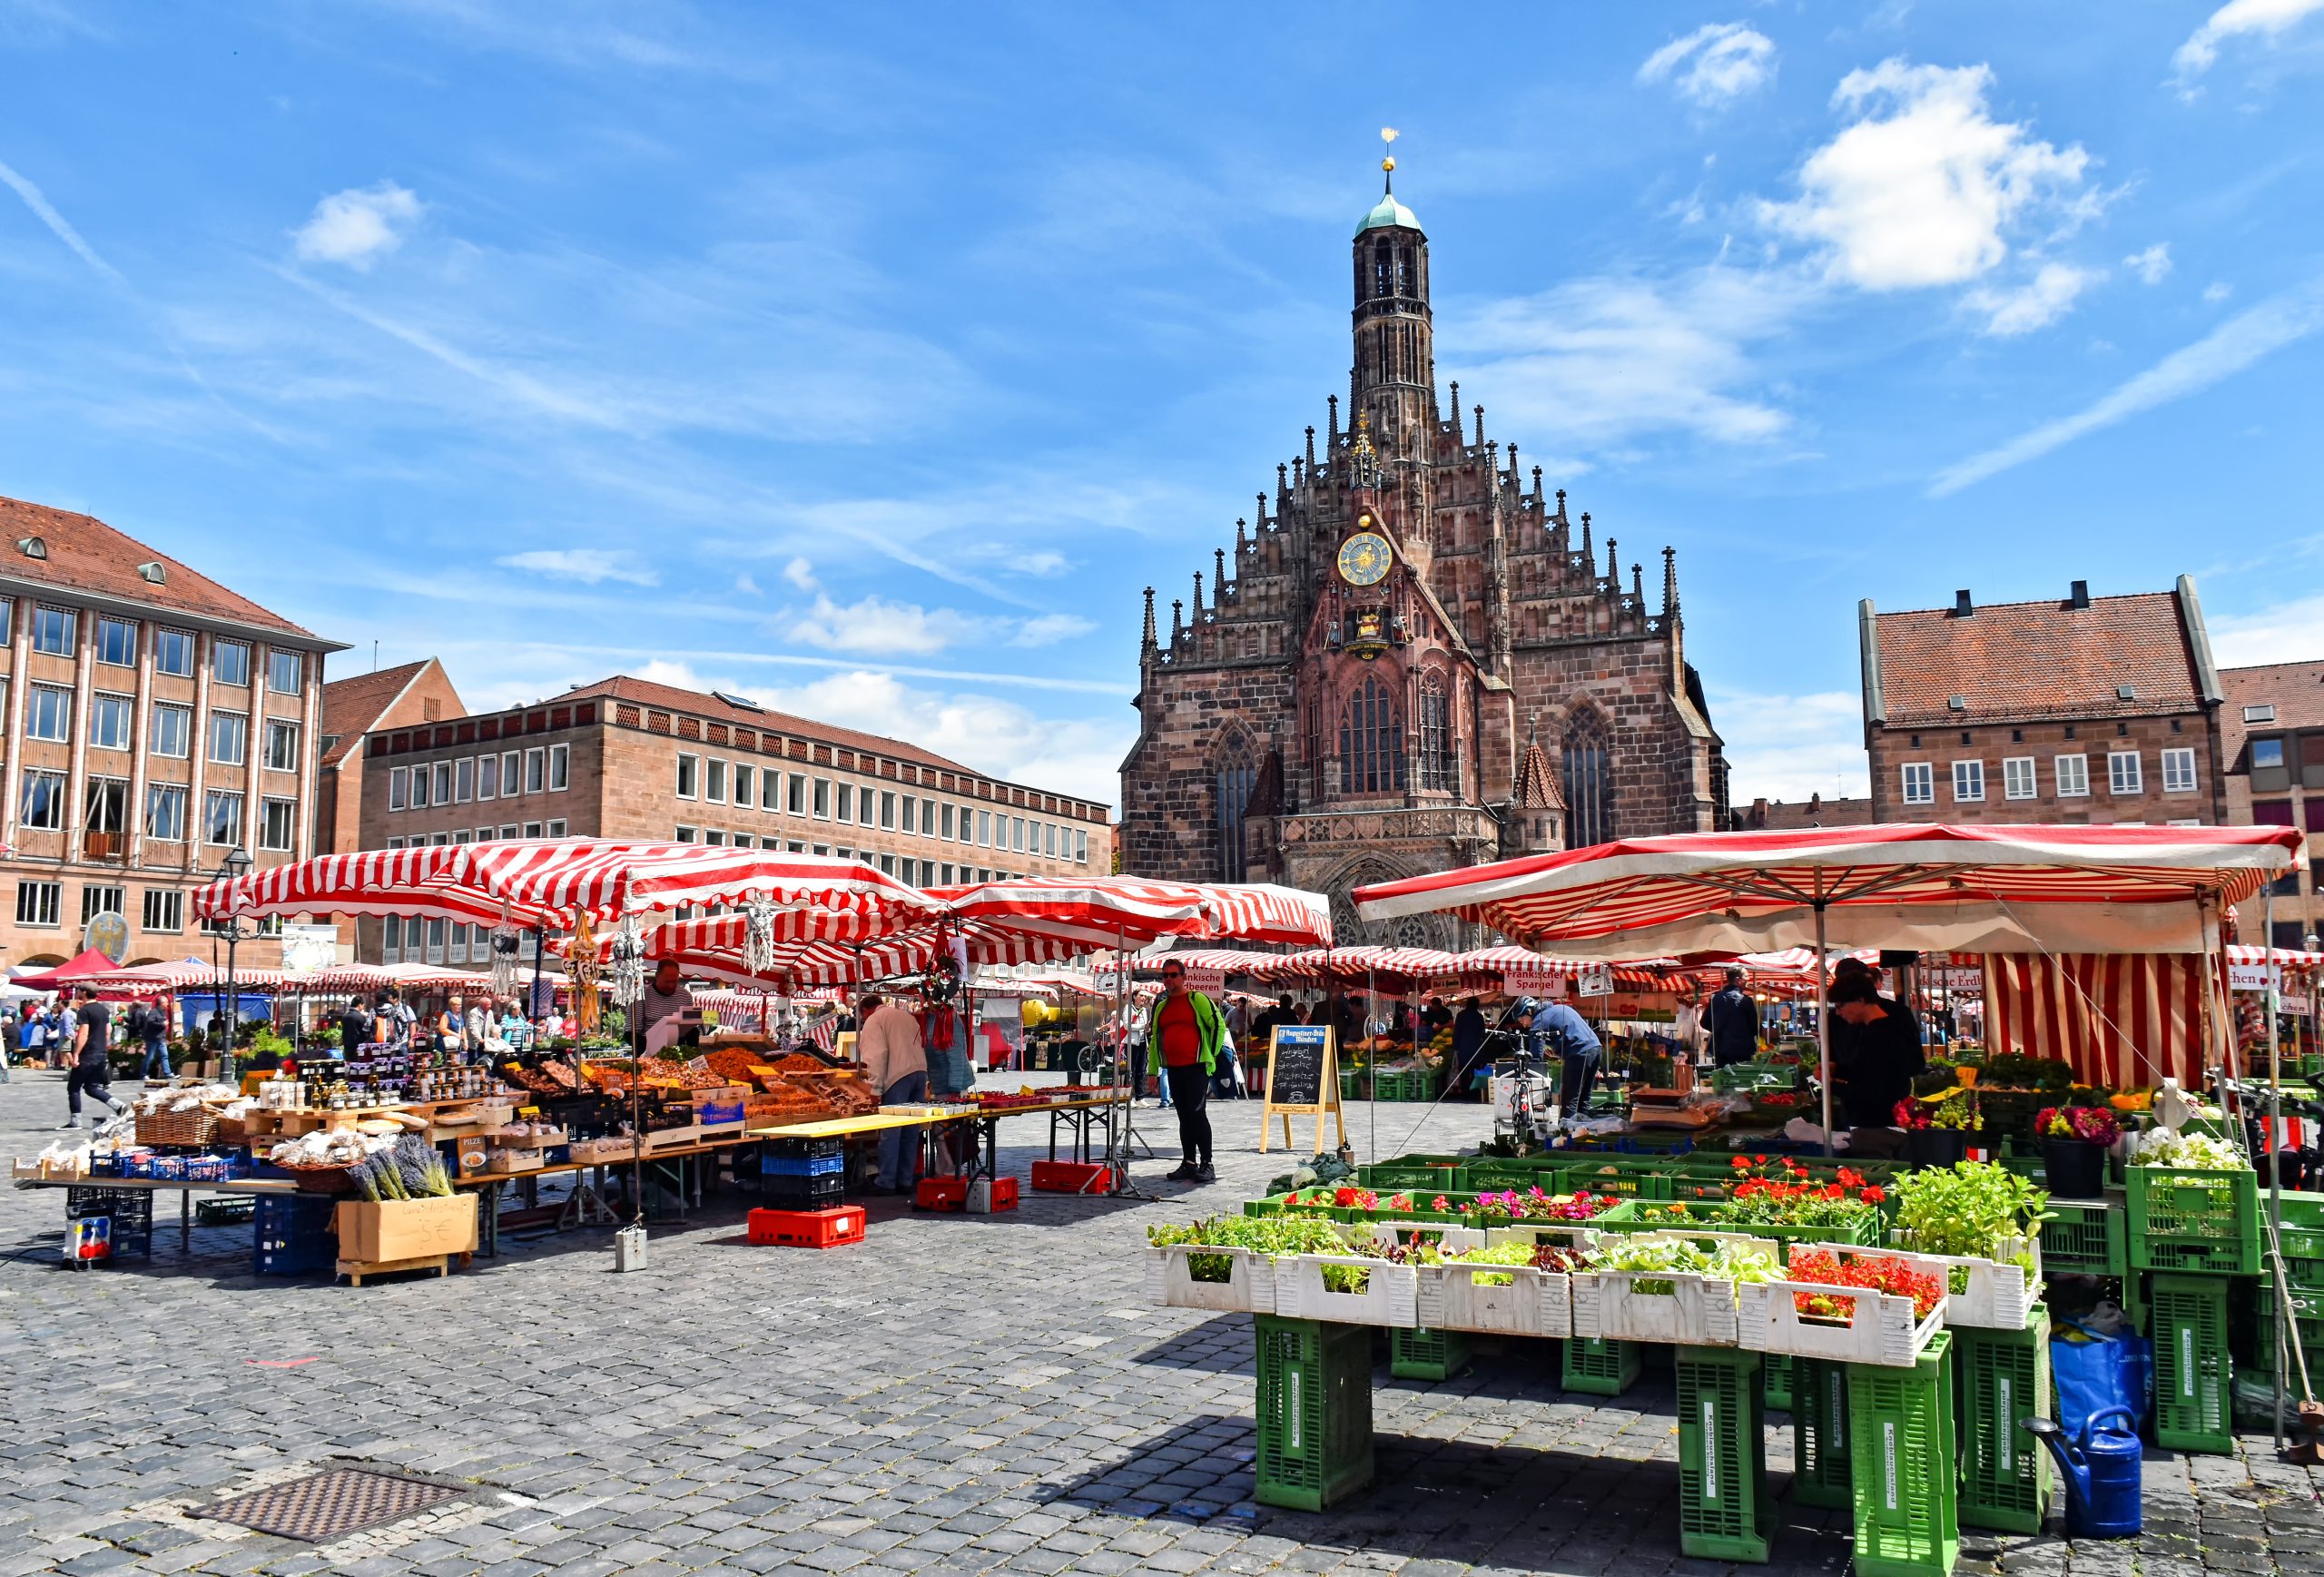 Nuremberg, Germany   : Market stalls on the market square of the Franconian city of Nuremberg in Germany